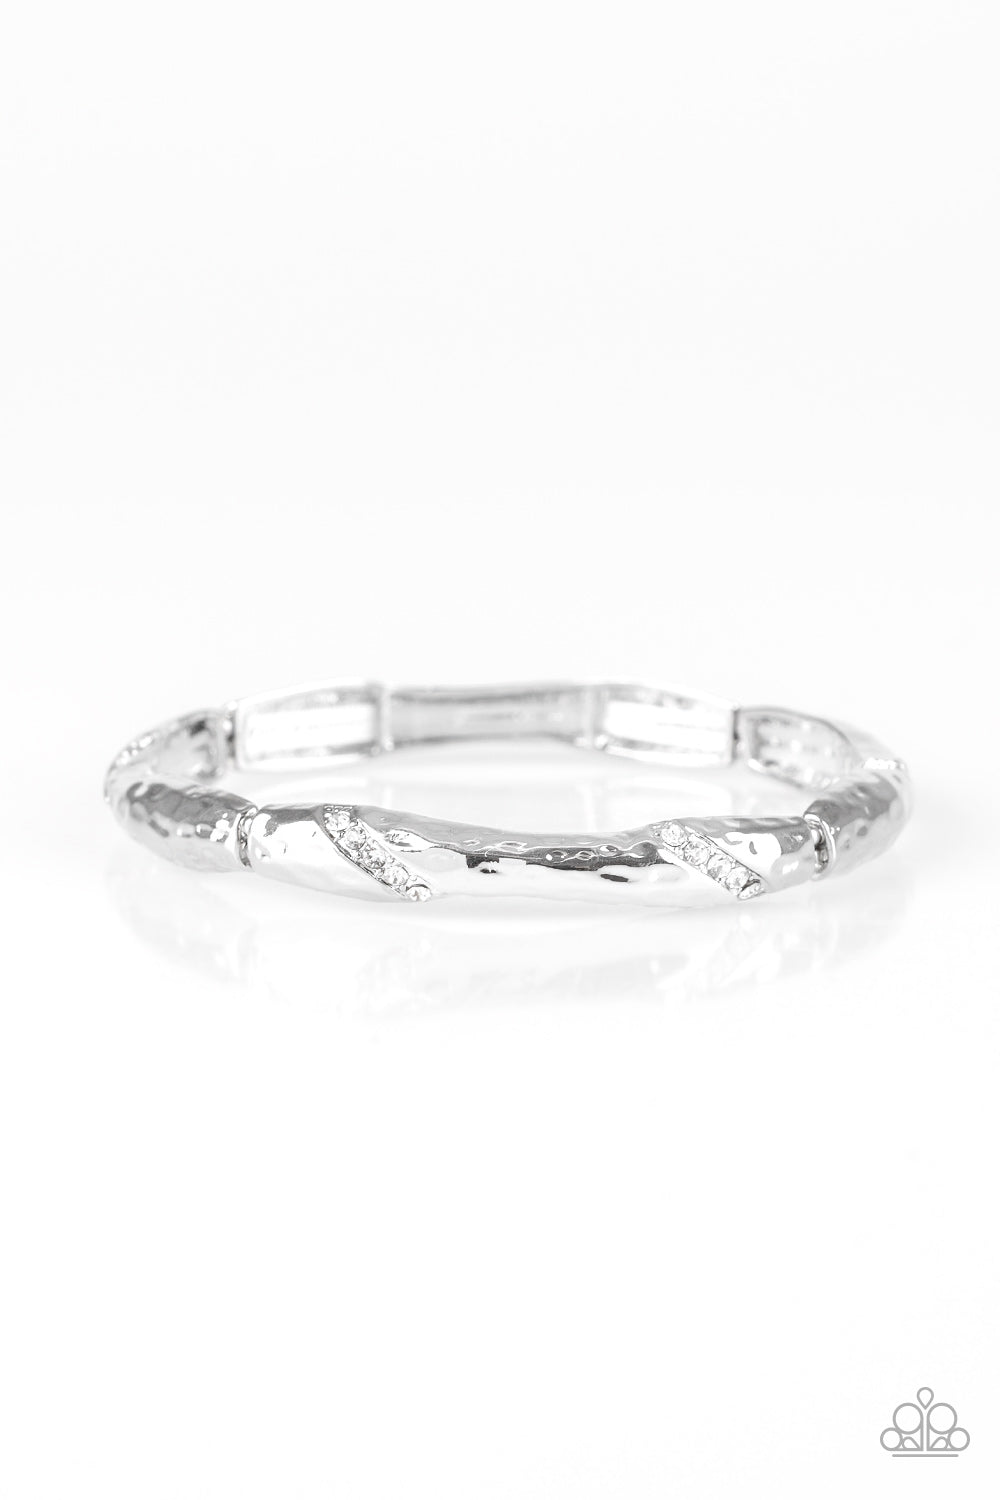 WATCH OUT FOR ICE - WHITE RHINESTONES DAINTY STRETCH BANGLE BRACELET